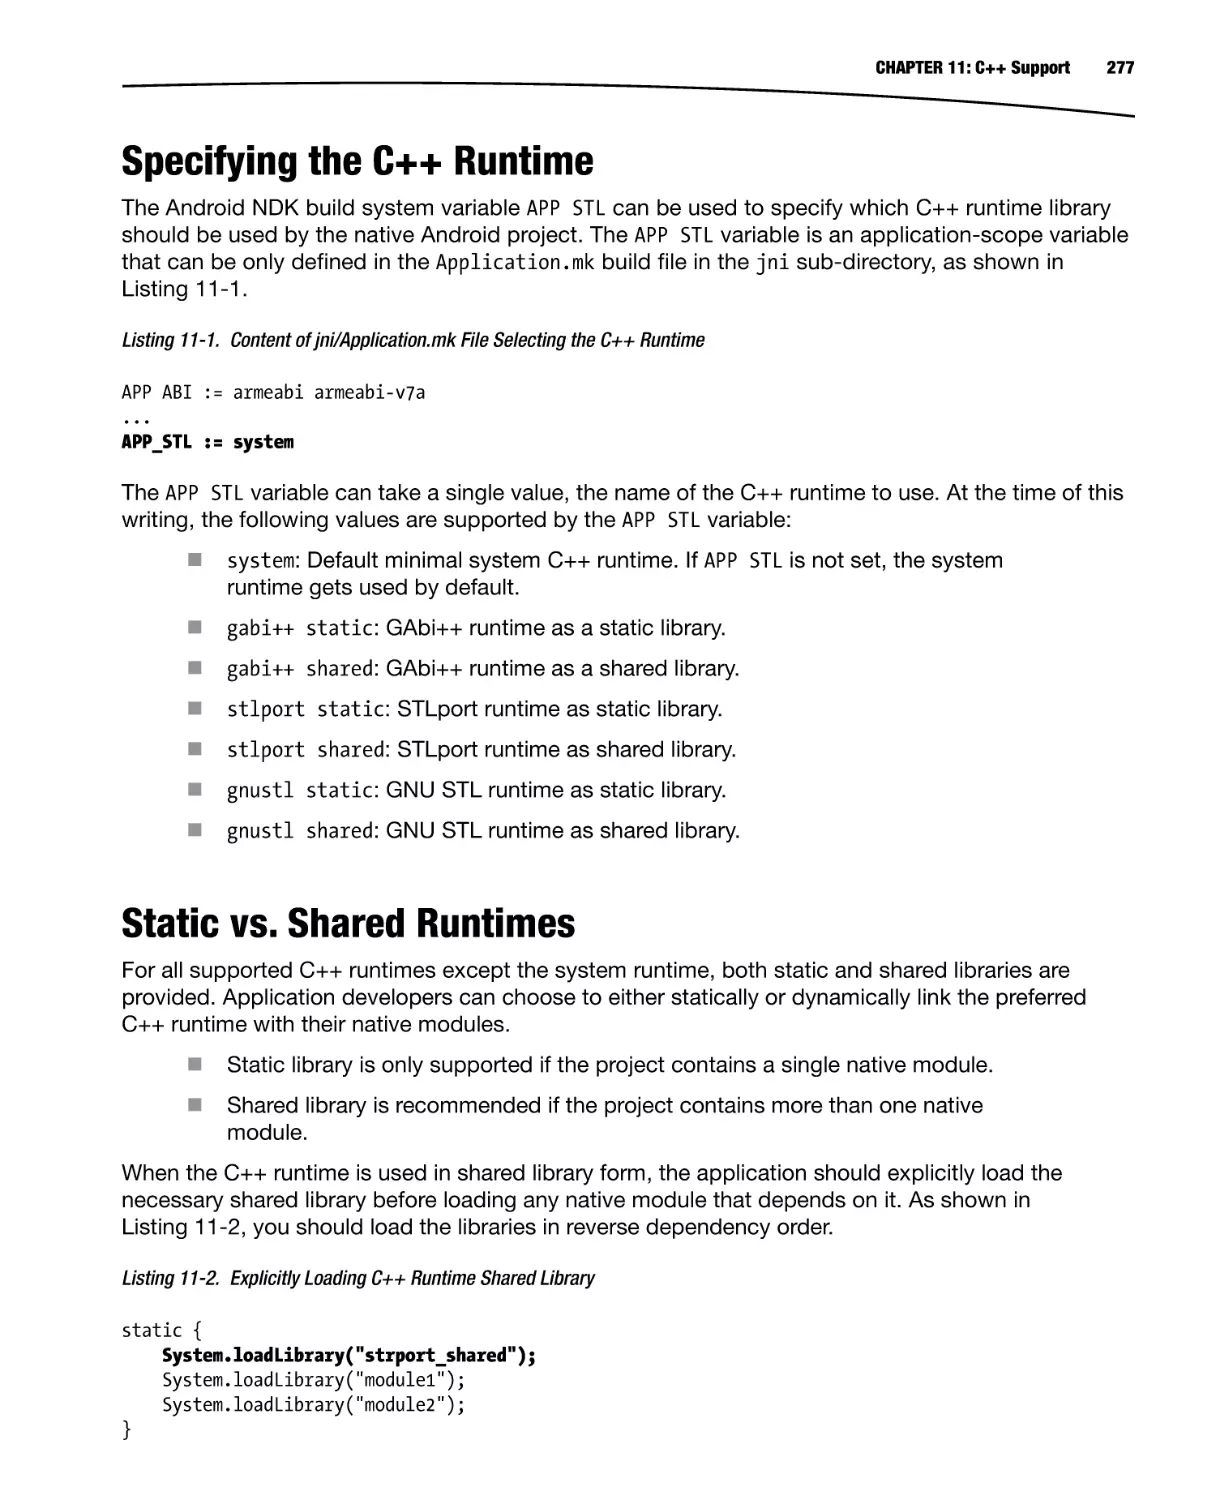 Specifying the C++ Runtime
Static vs. Shared Runtimes